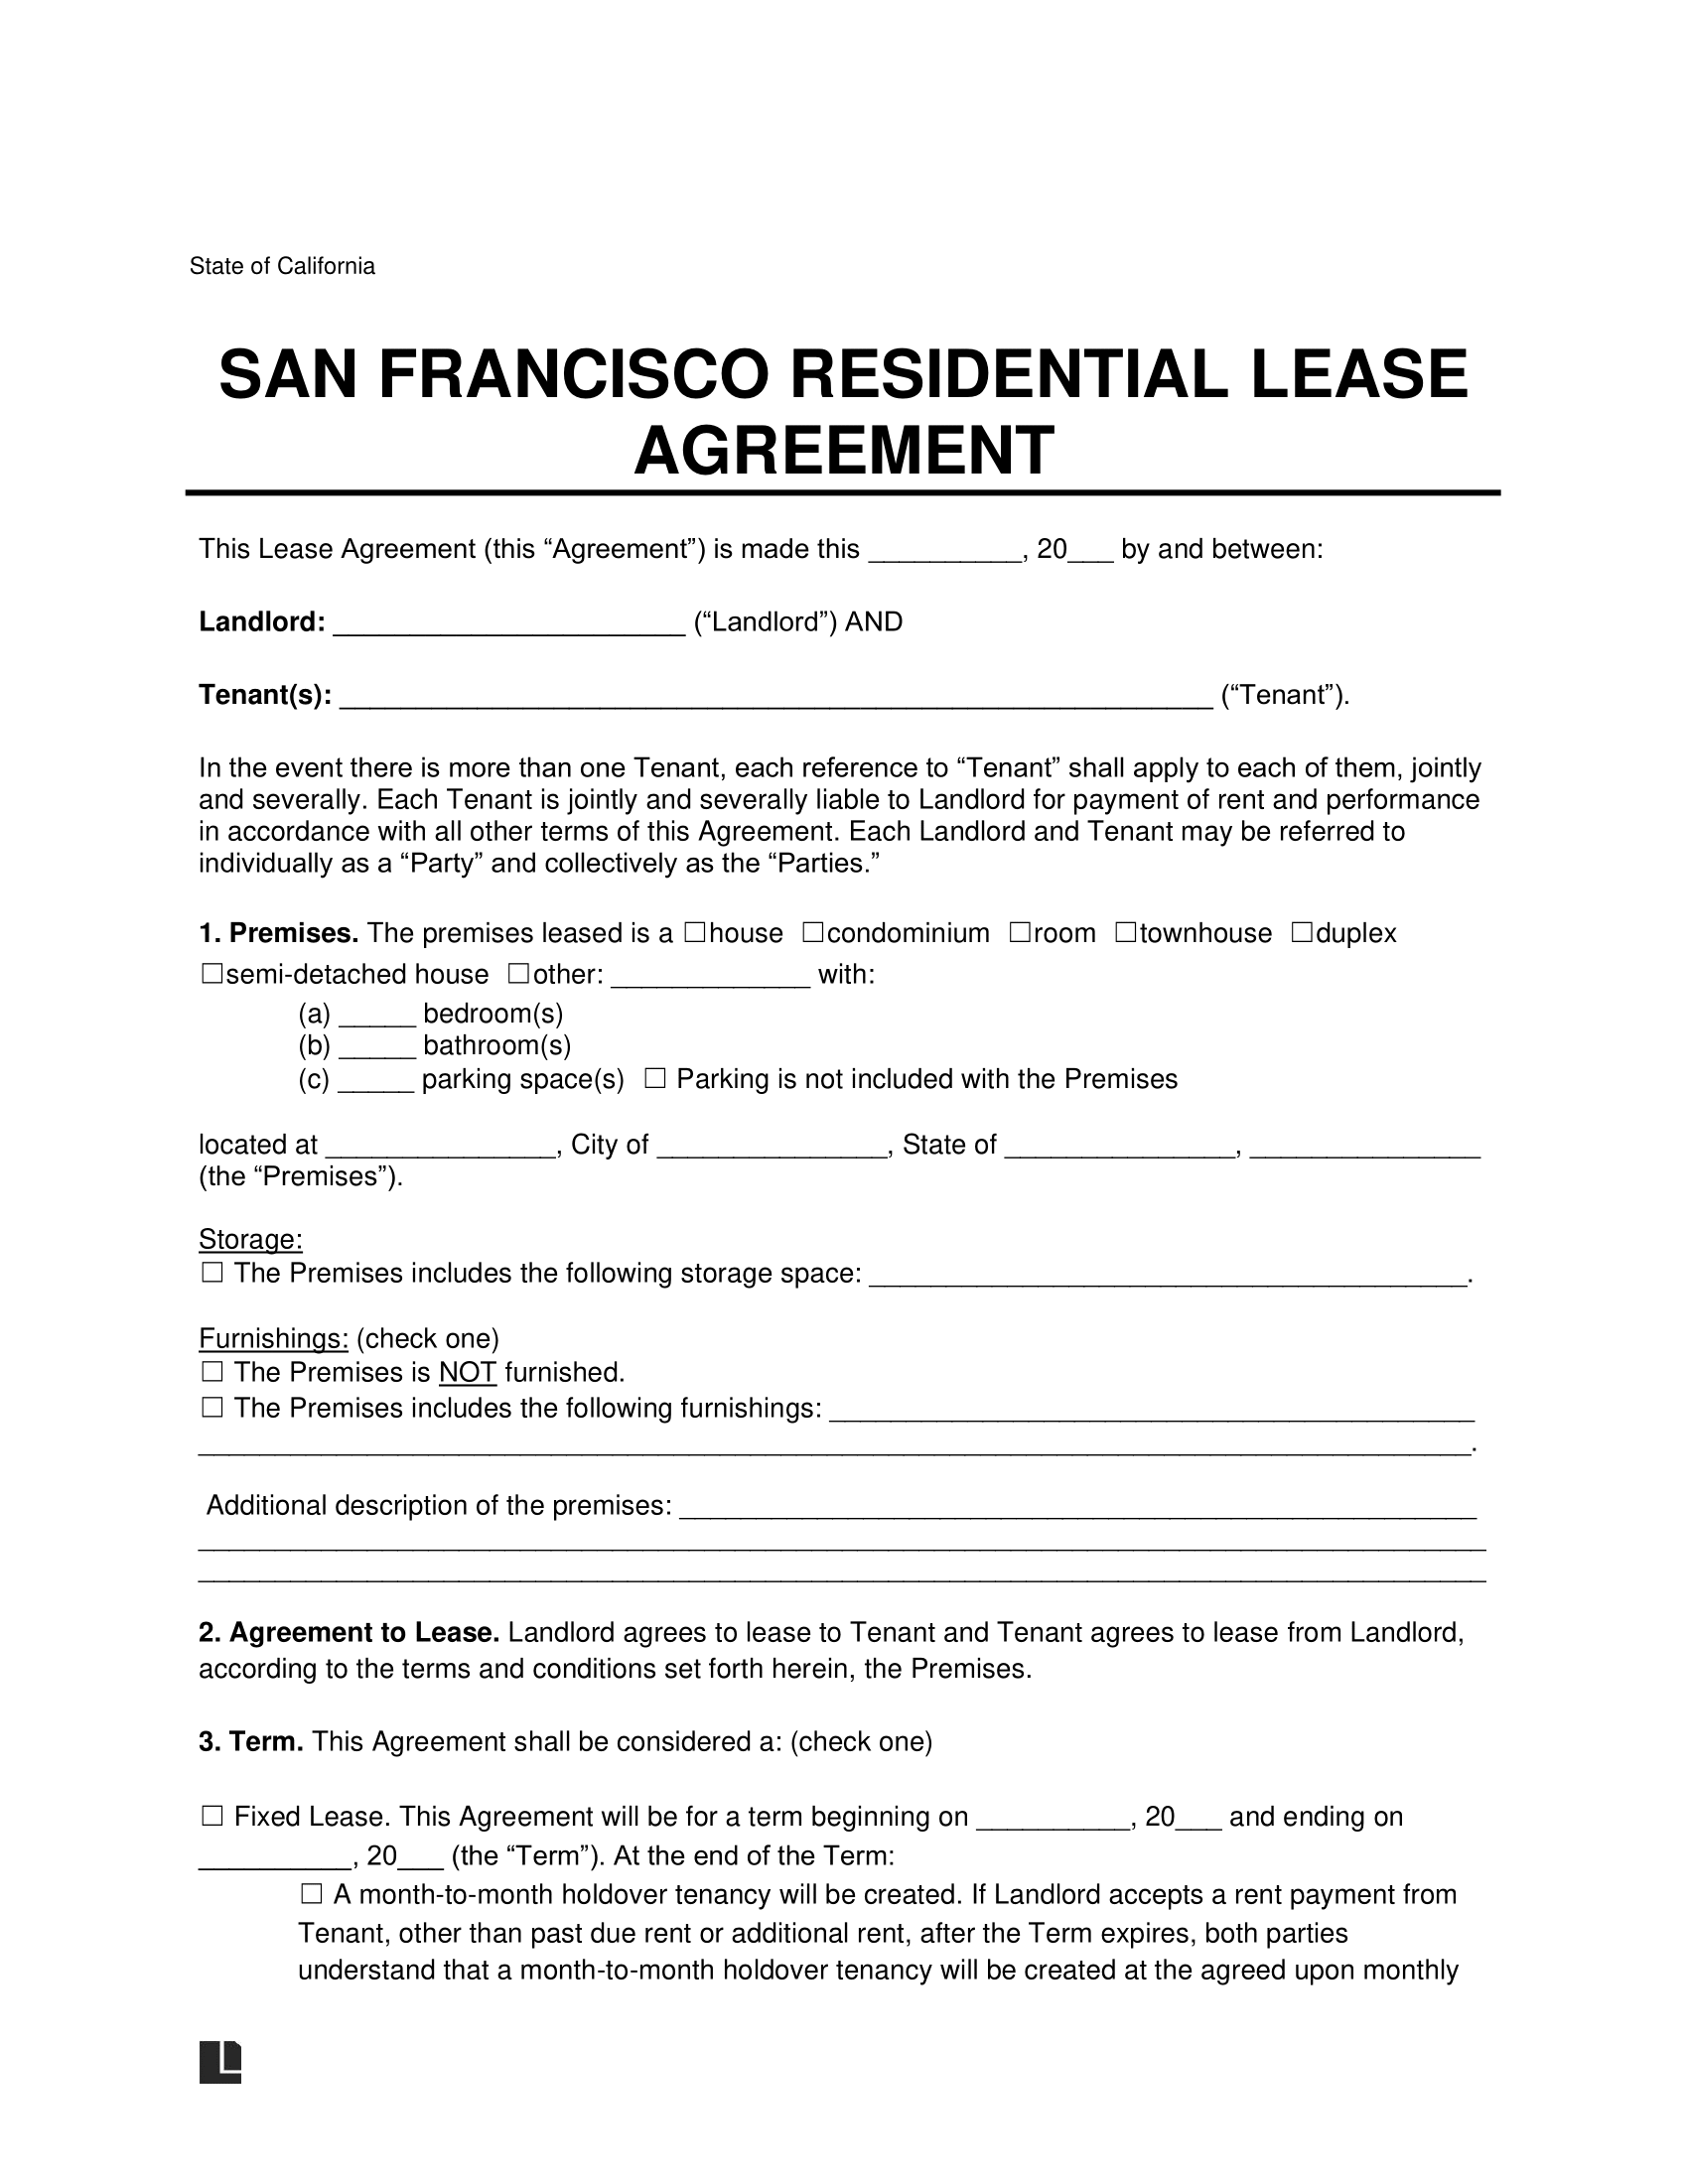 San Francisco Residential Lease Agreement Template